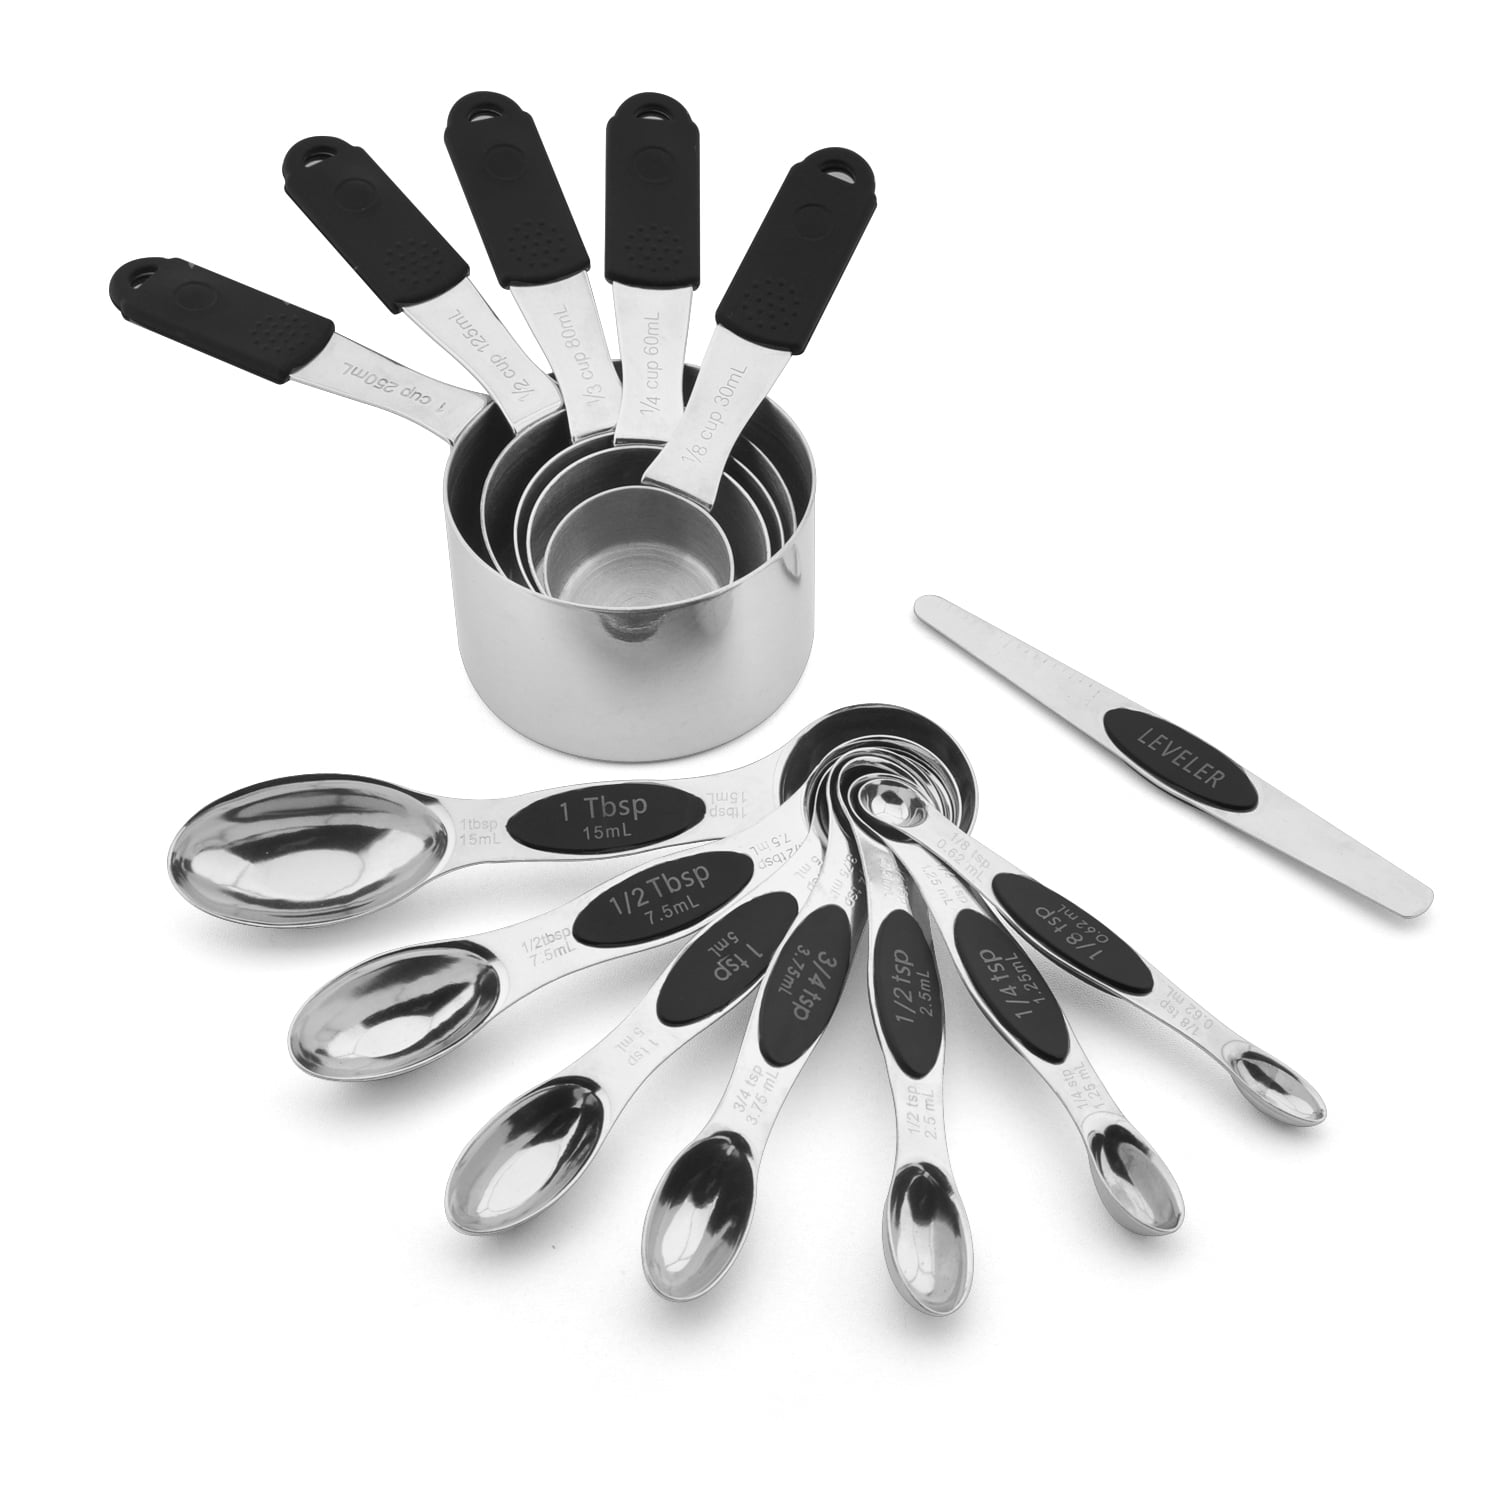  E-HQCLIFE Measuring cups and spoons set, 304 Stainless steel  measuring cups, 8 Pcs magnetic measuring spoons, 7 Pcs metal measuring cups  for Cooking & Baking: Home & Kitchen